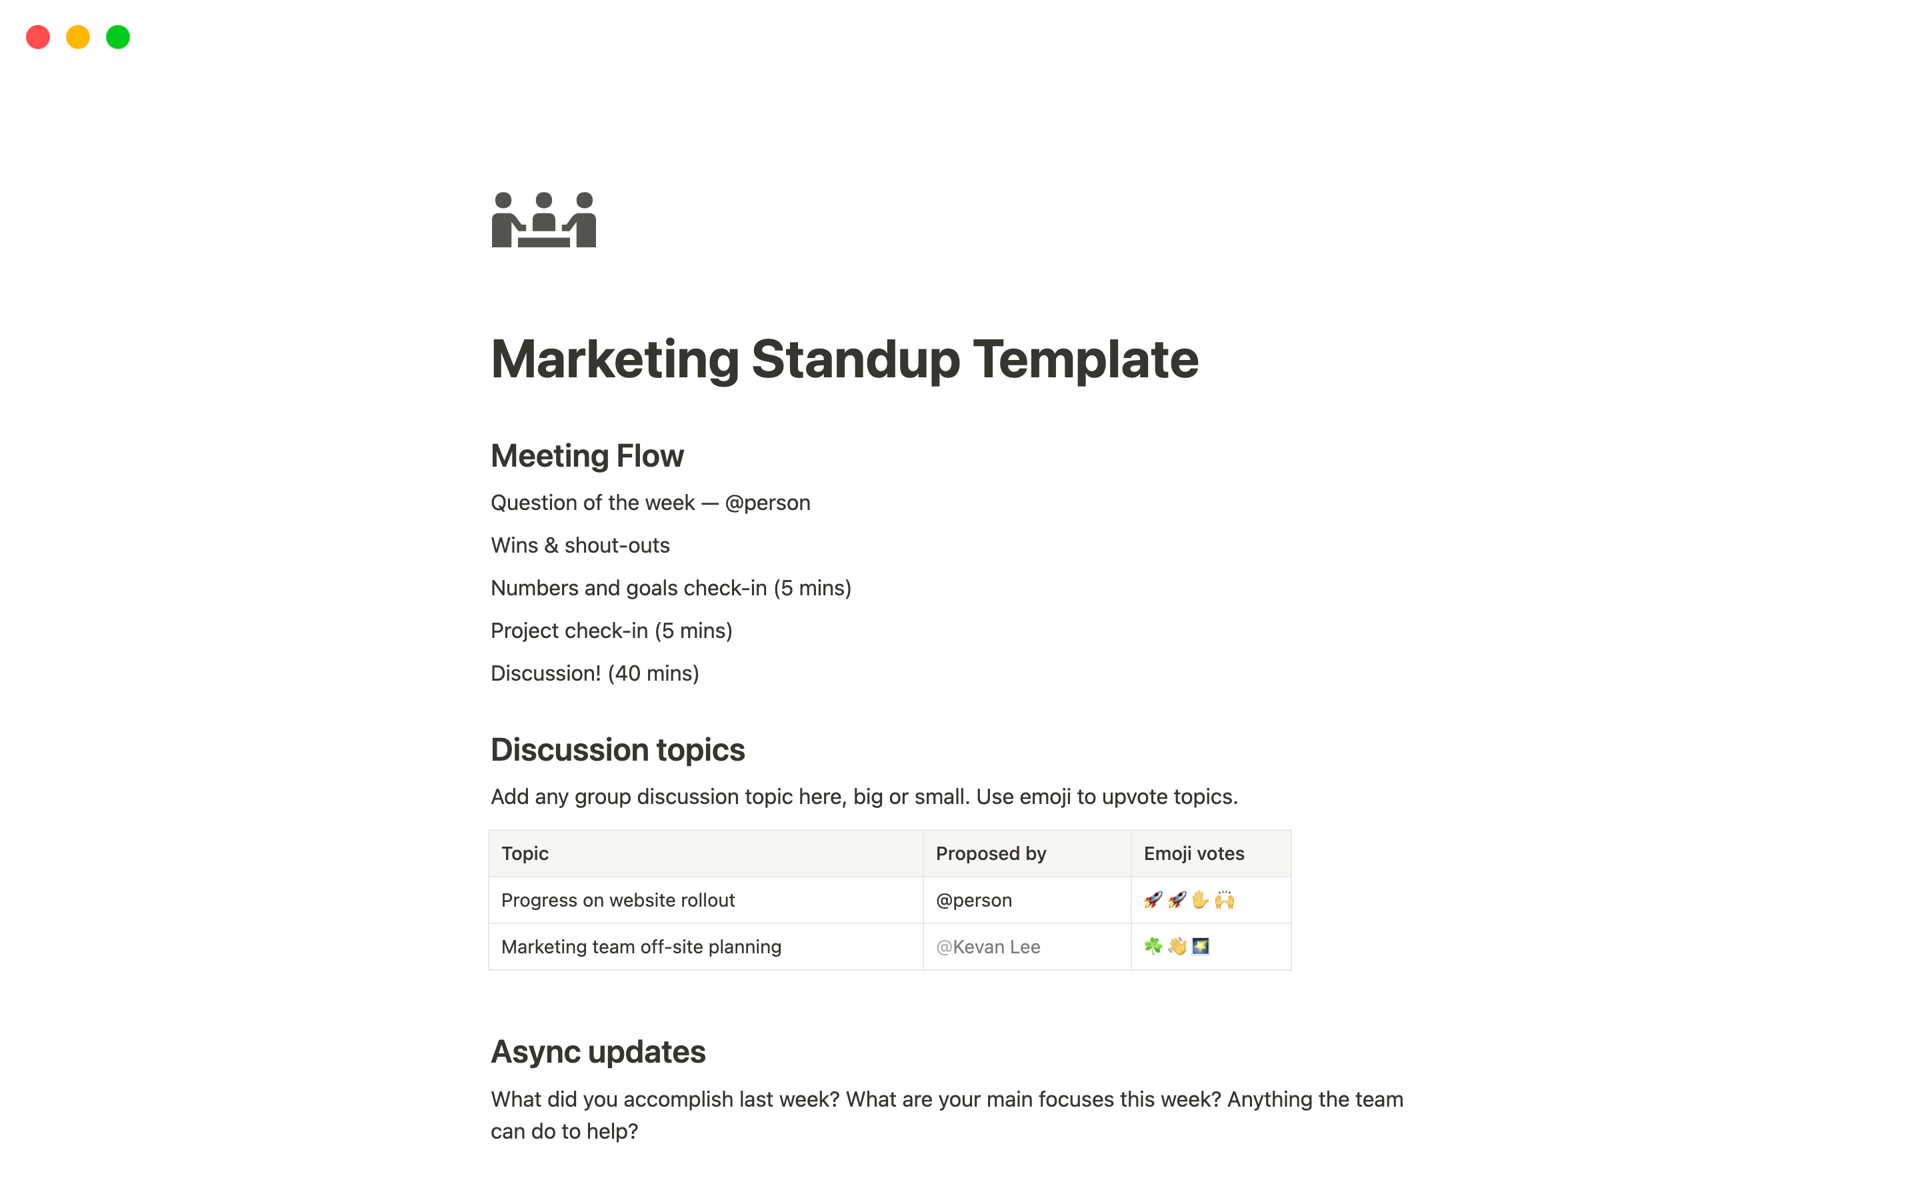 Streamline your team meetings with this Meeting Flow template, ensuring efficient check-ins and focused discussions.